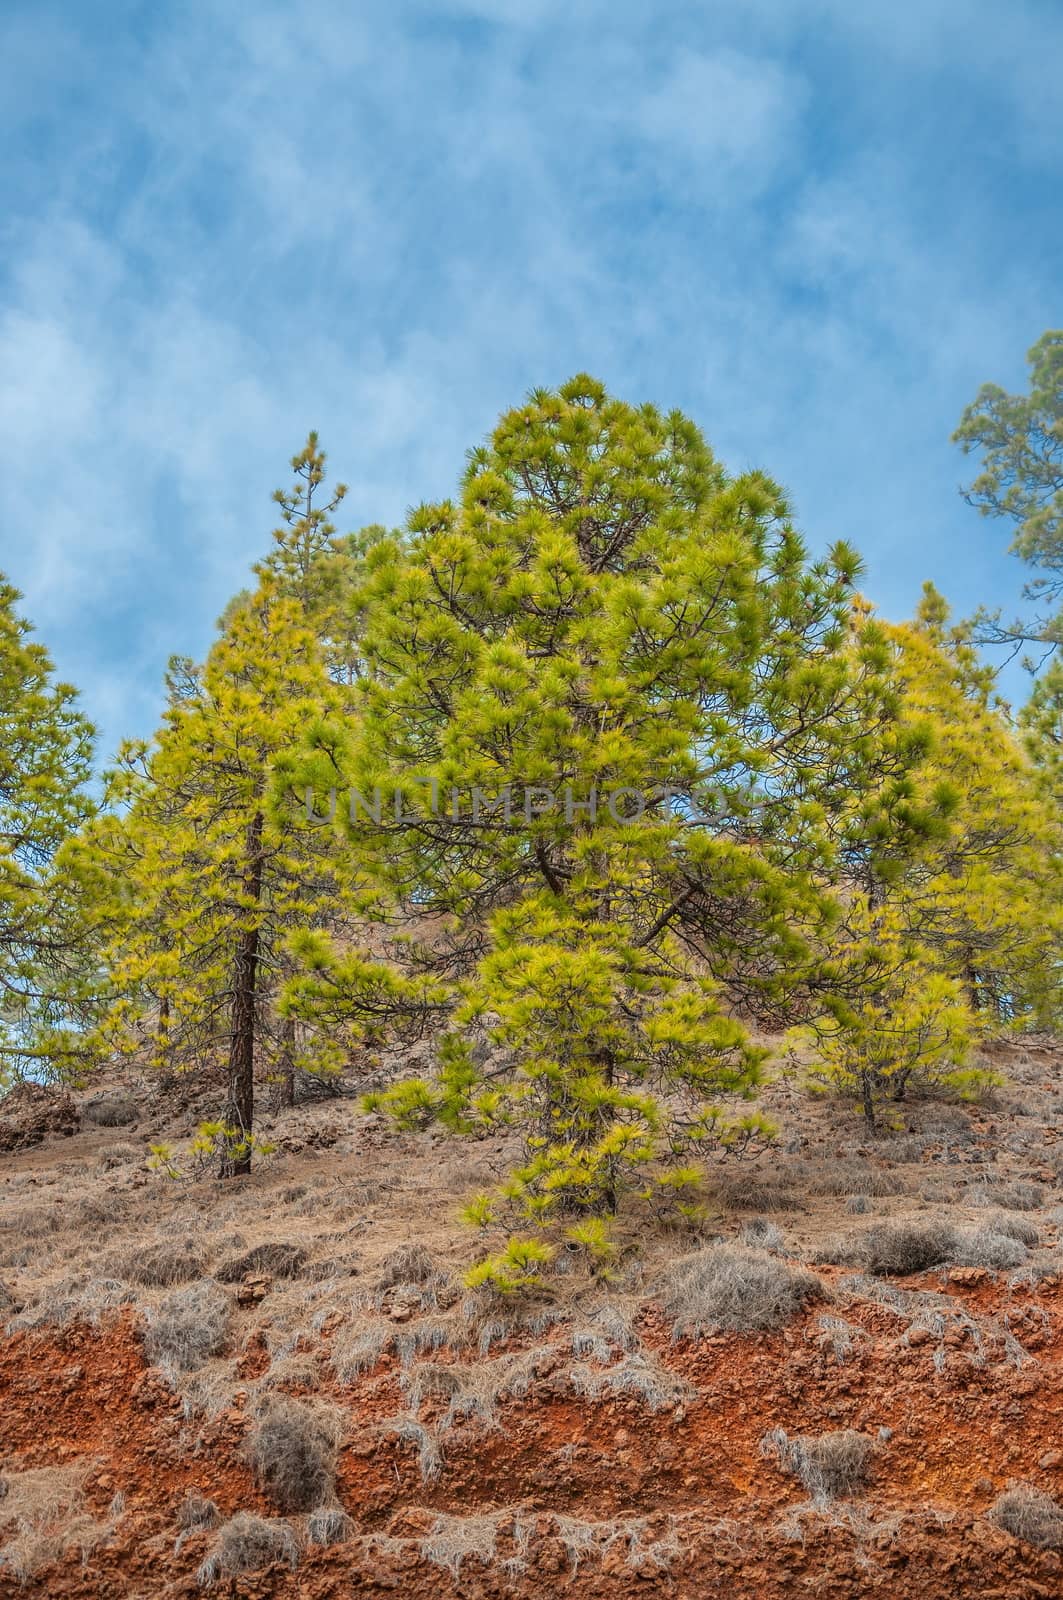 Canarian pines, pinus canariensis in the Corona Forestal Nature Park, Tenerife, Canary Islands